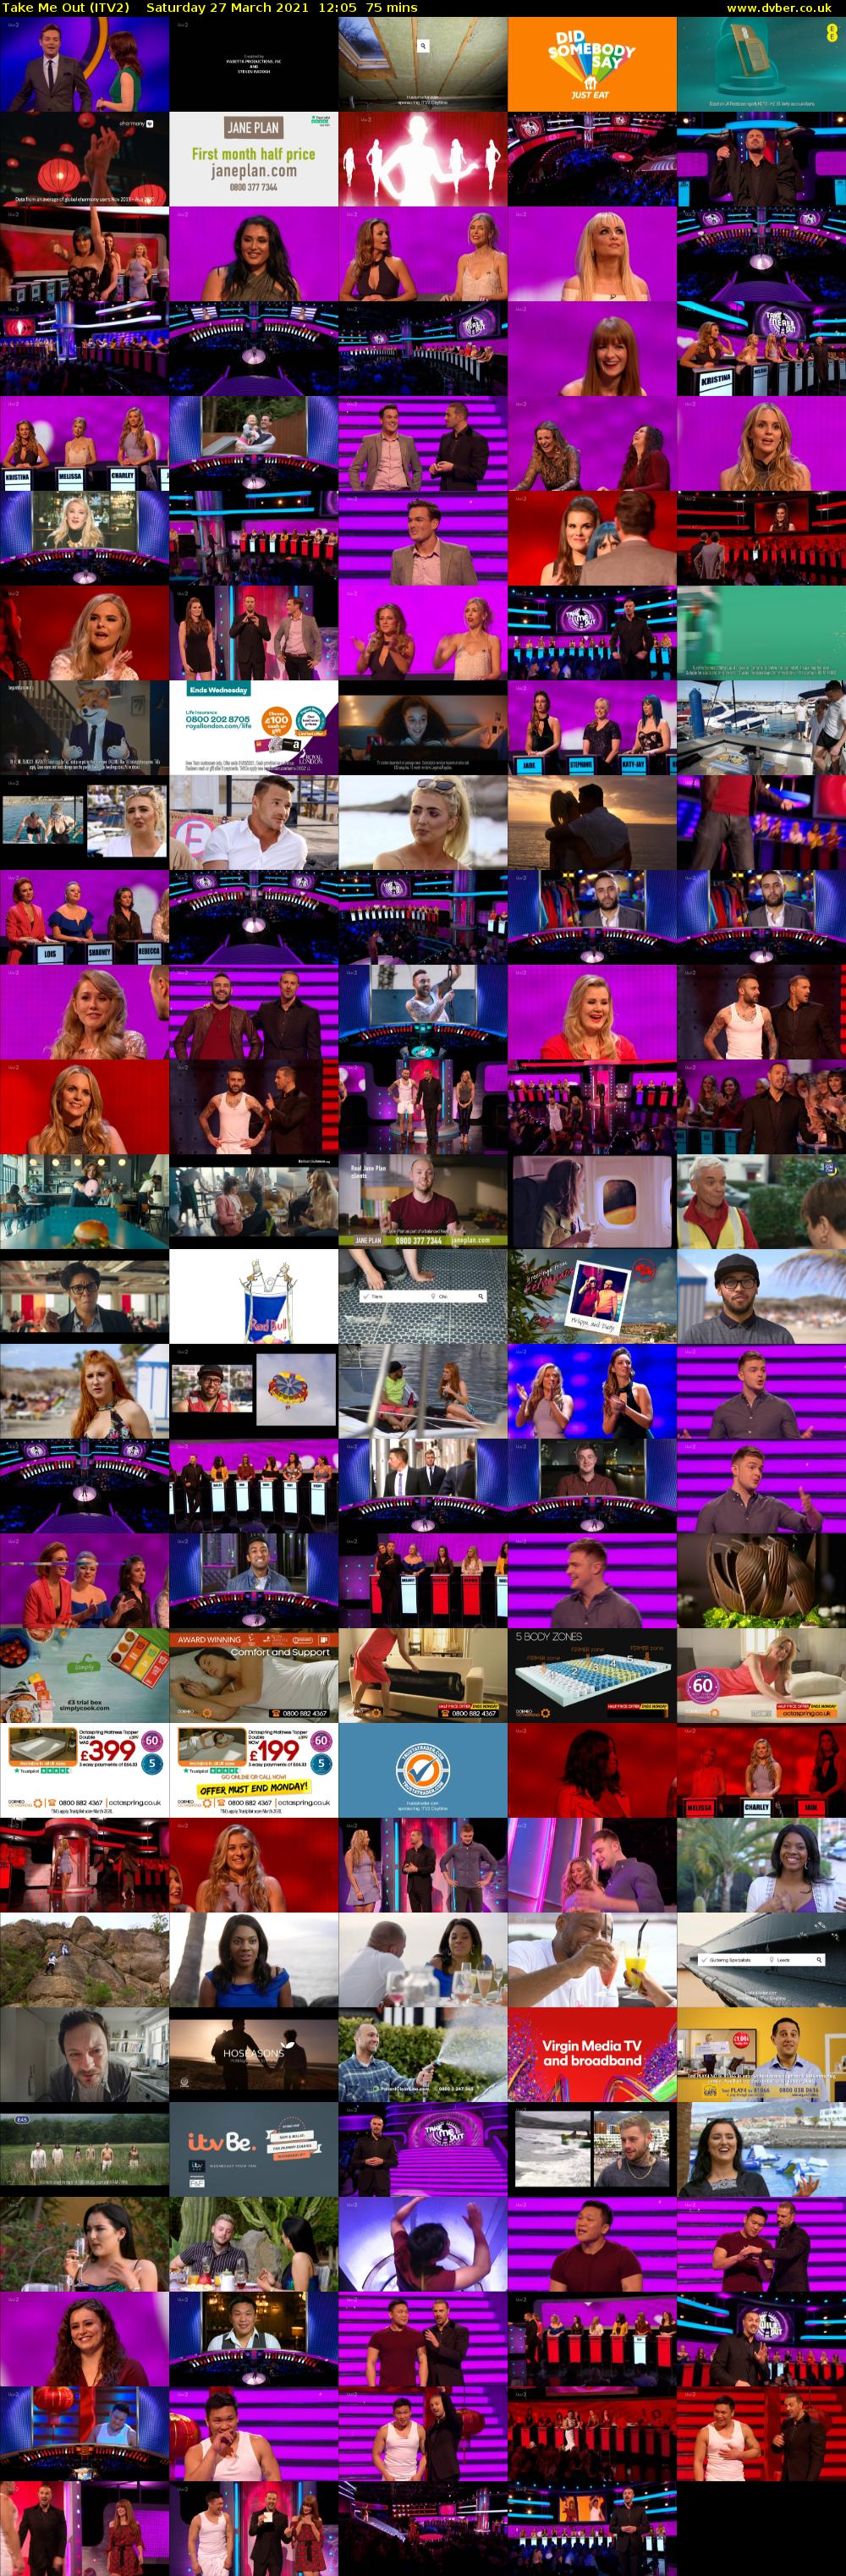 Take Me Out (ITV2) Saturday 27 March 2021 12:05 - 13:20